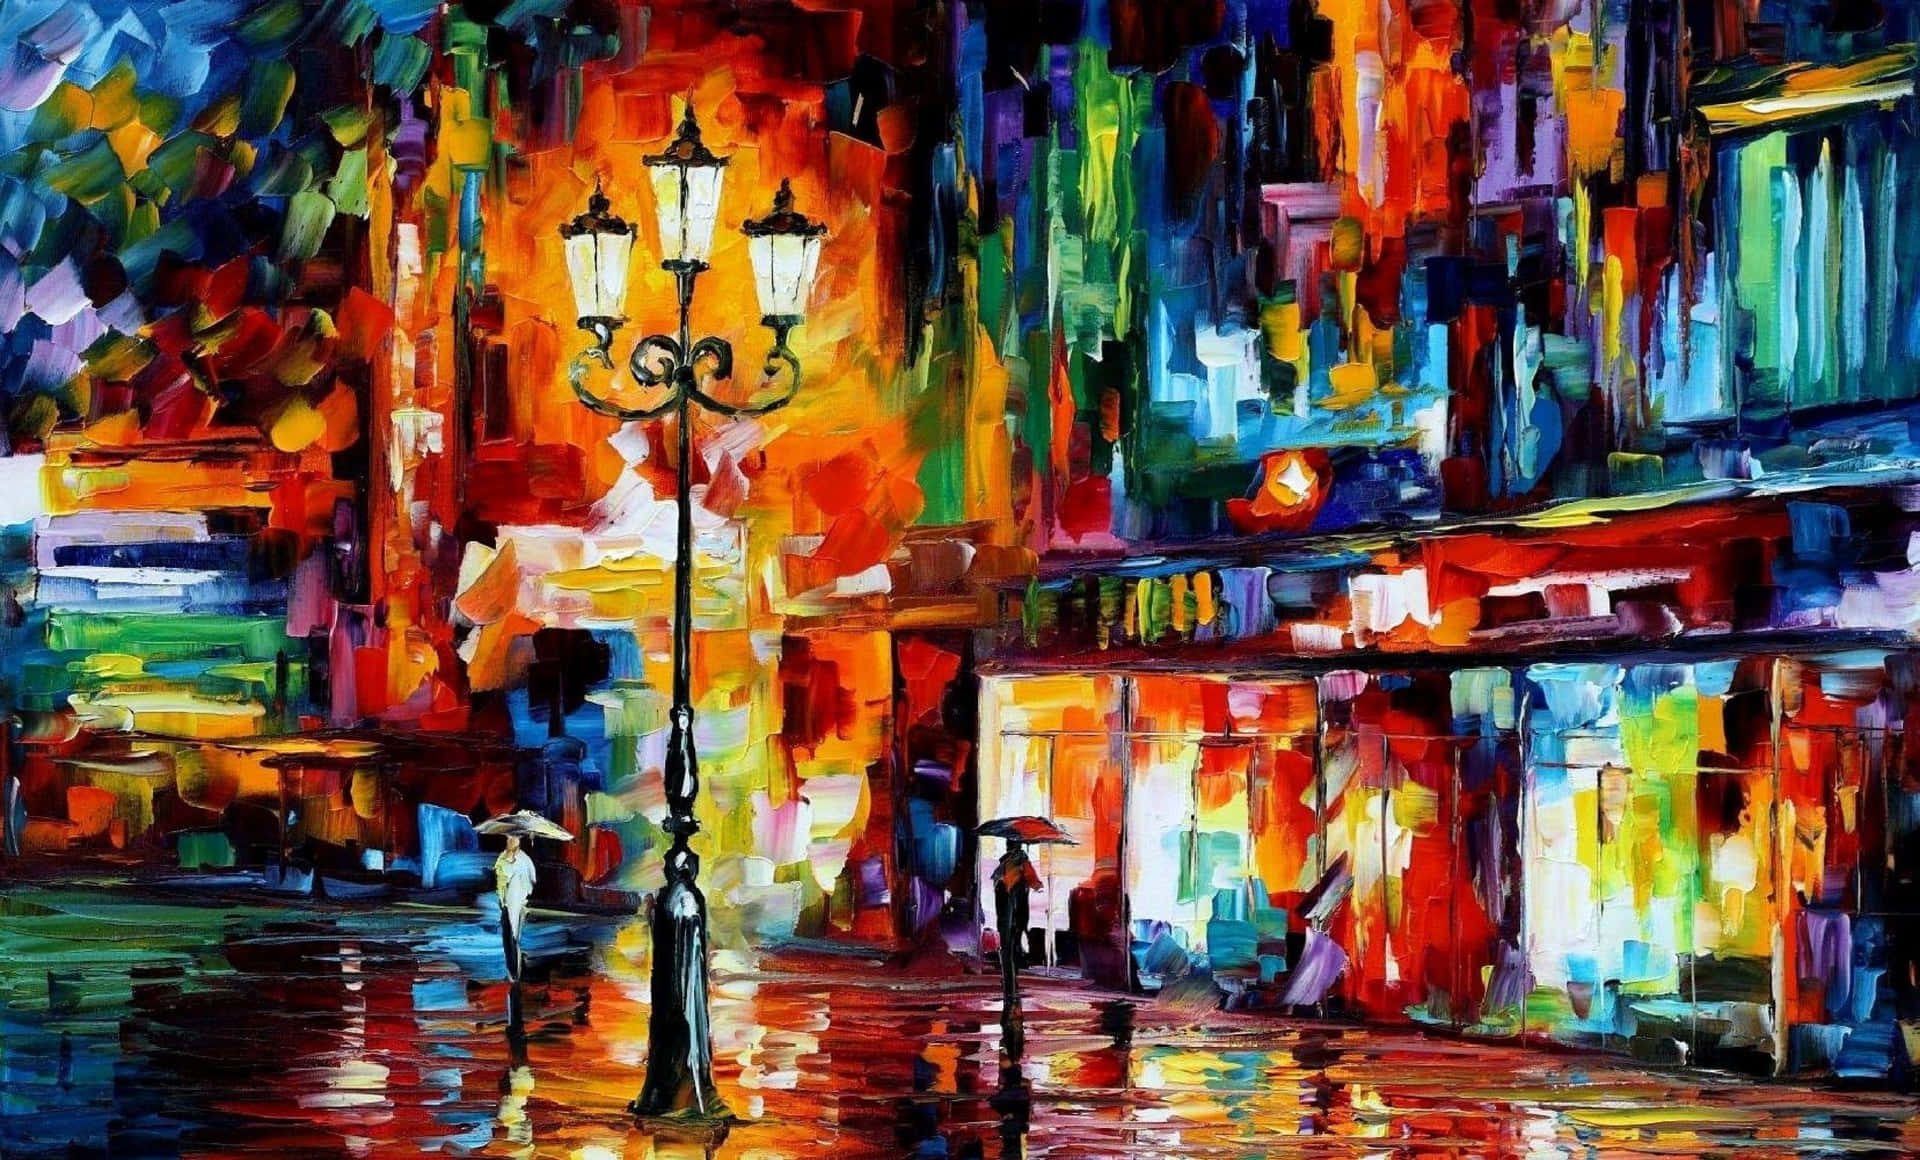 a painting of a street scene with lights and people